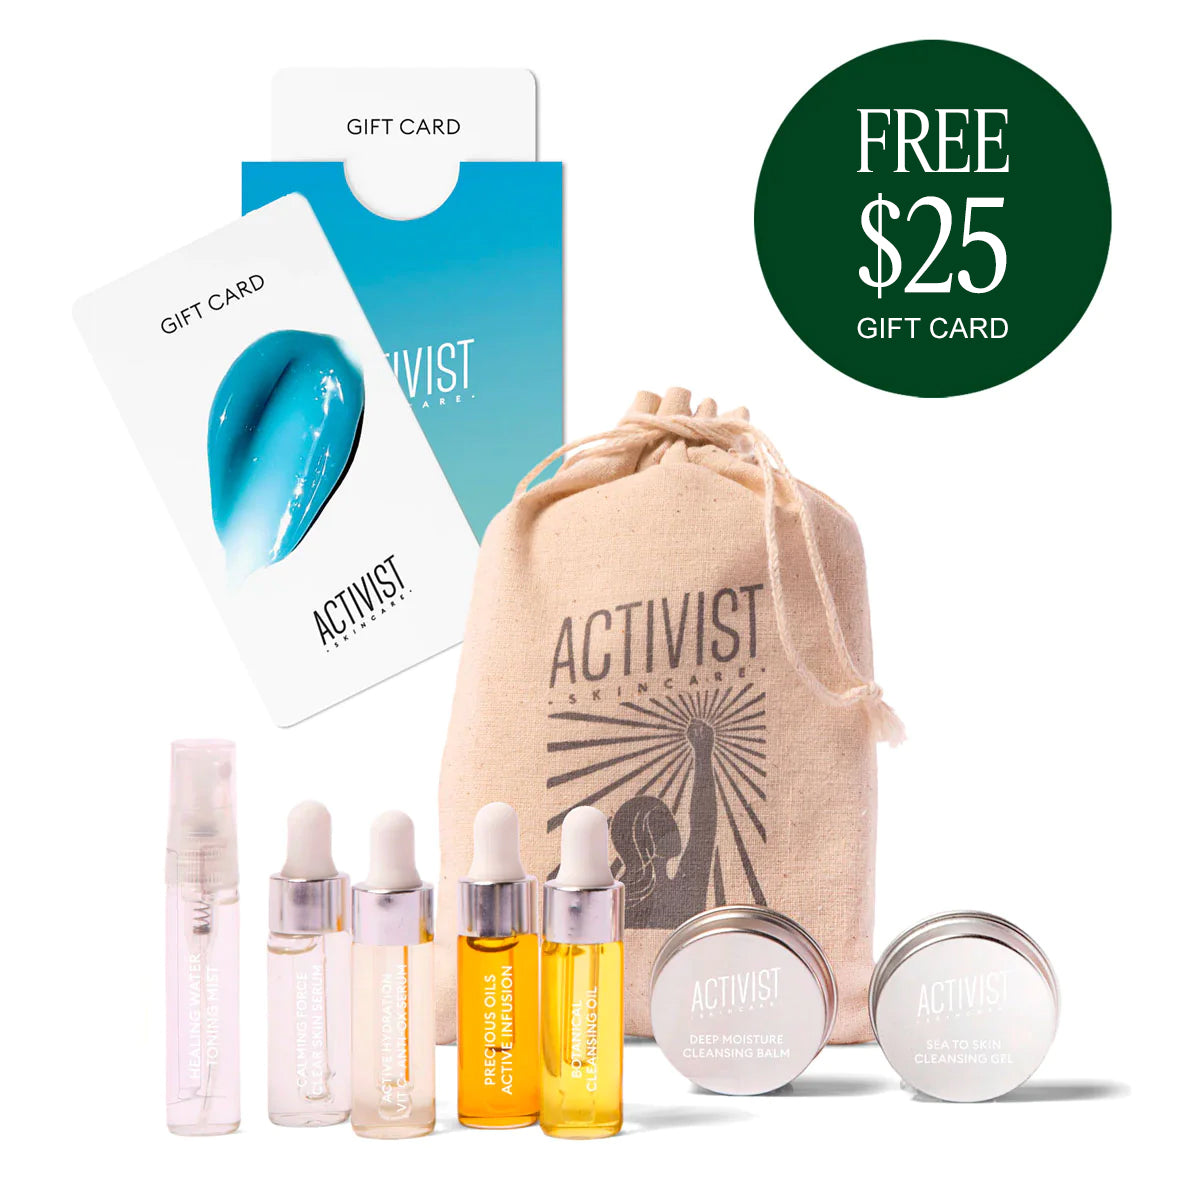 Free $25 Gift Card with Trial Kit